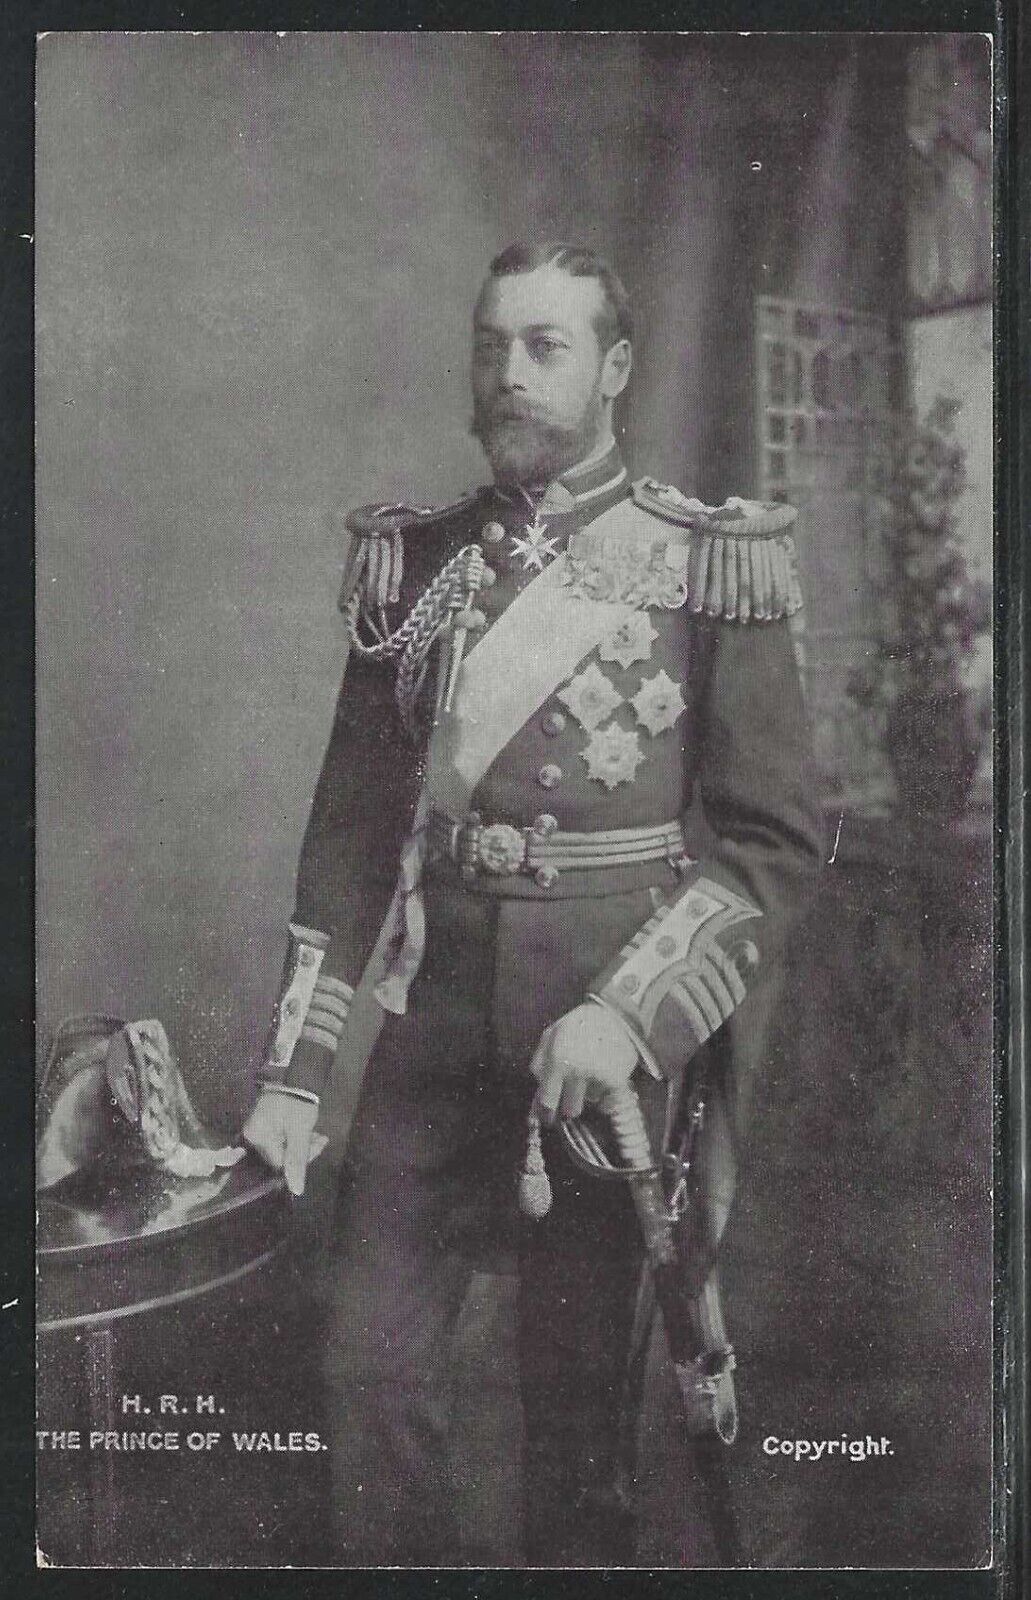 H. R. H. The Prince of Wales, Great Britain, Circa 1901-1910 Real Photo Postcard